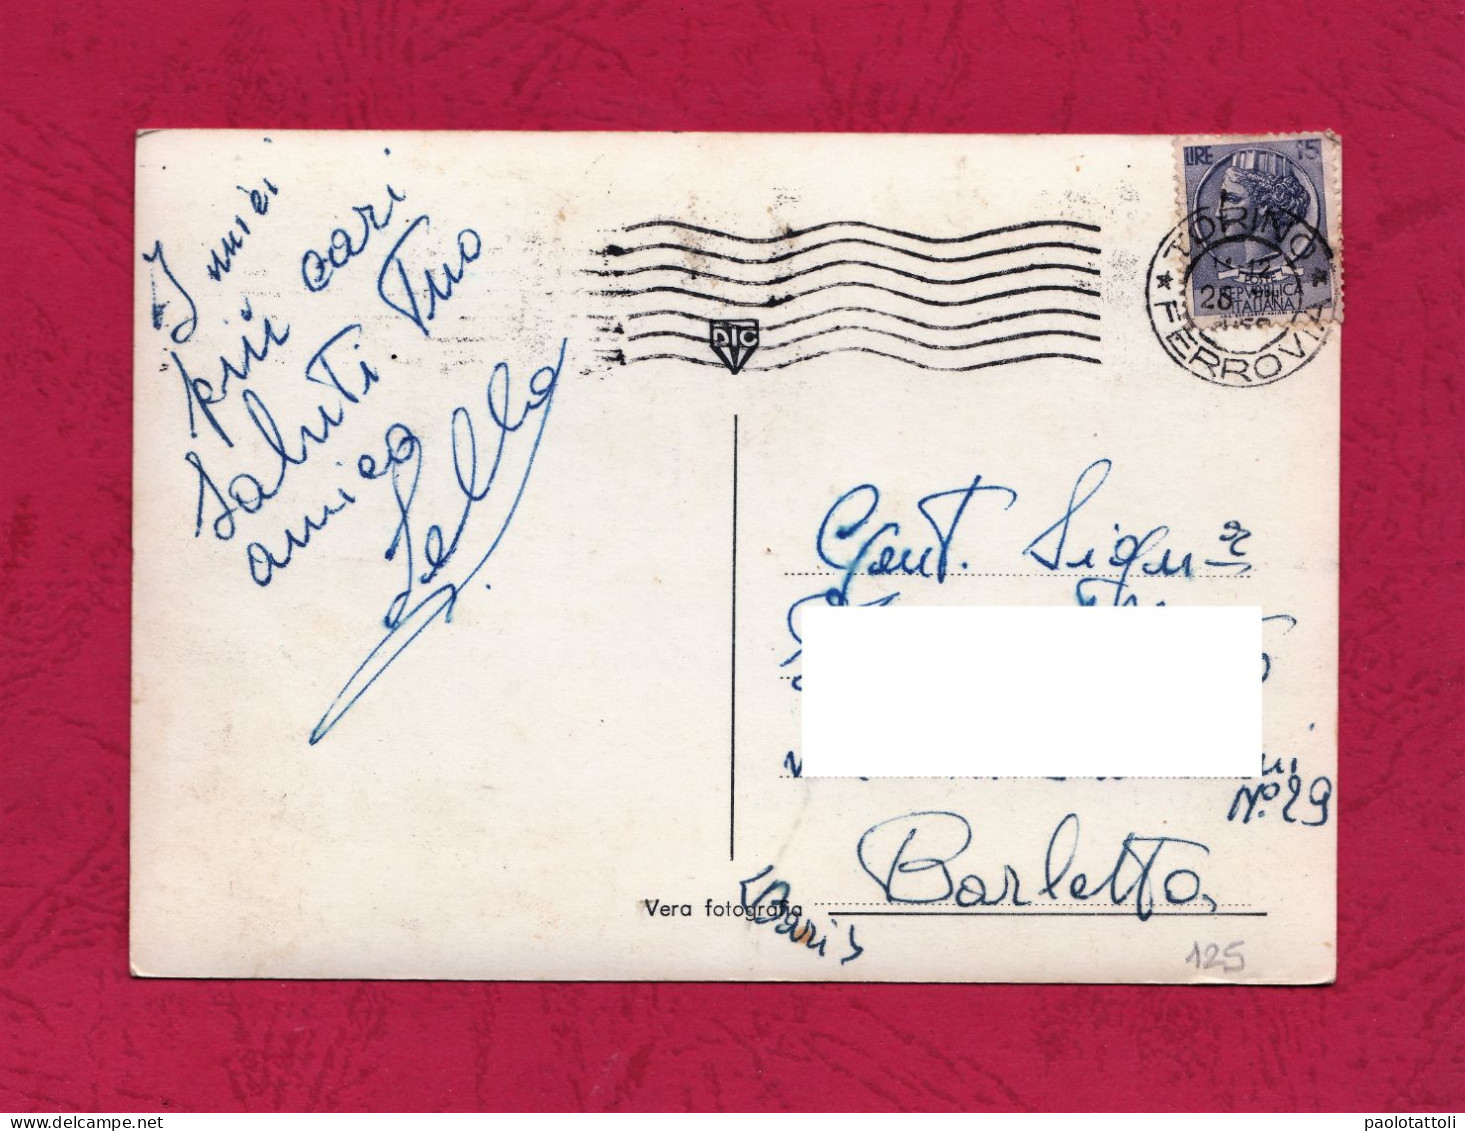 Saluti Da Torino, Vedutine- Standard Size, Divided Back, Ed. DTC, Cancelled And Mailed To Barletta On 1958. - Parks & Gardens